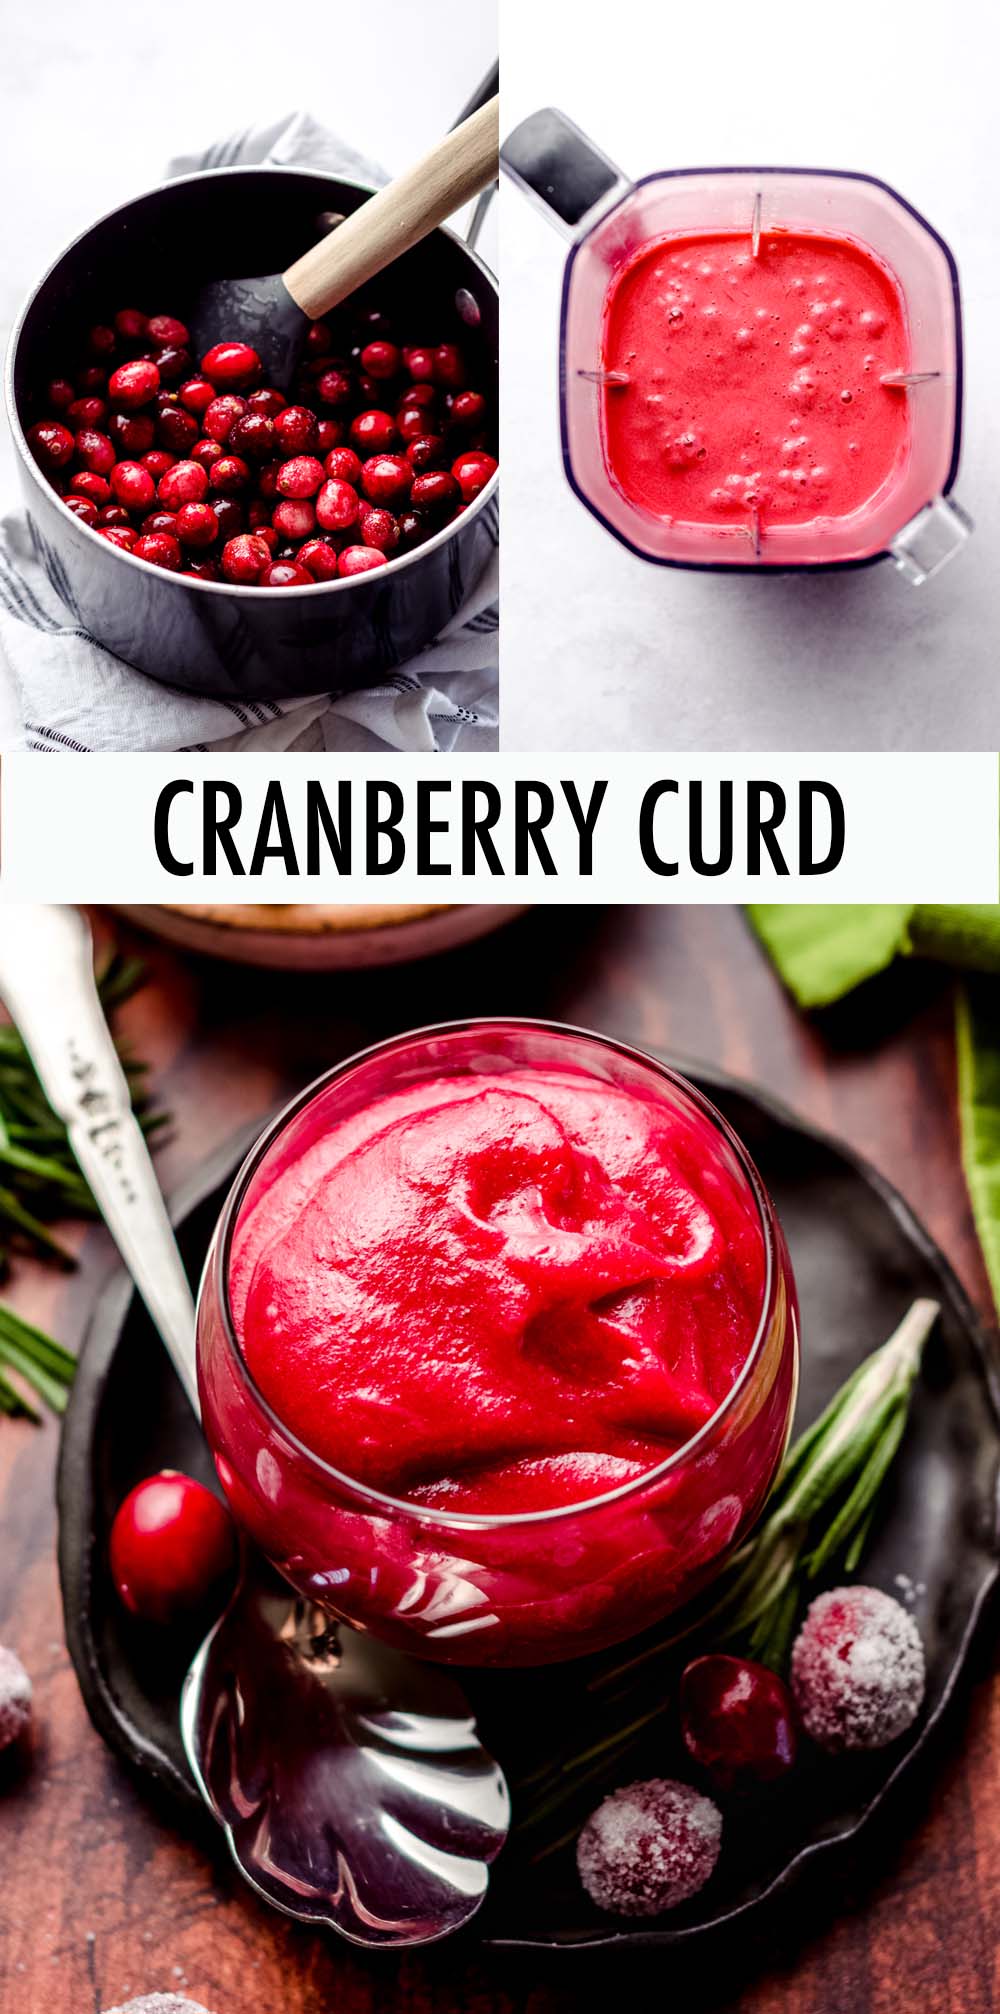 Turn fresh cranberries into tart and sweet cranberry curd with just a few simple ingredients. Perfect for spreading on seasonal goodies and breads or using as a topping or filling for cakes, cupcakes, pies, cheesecakes, and more! via @frshaprilflours